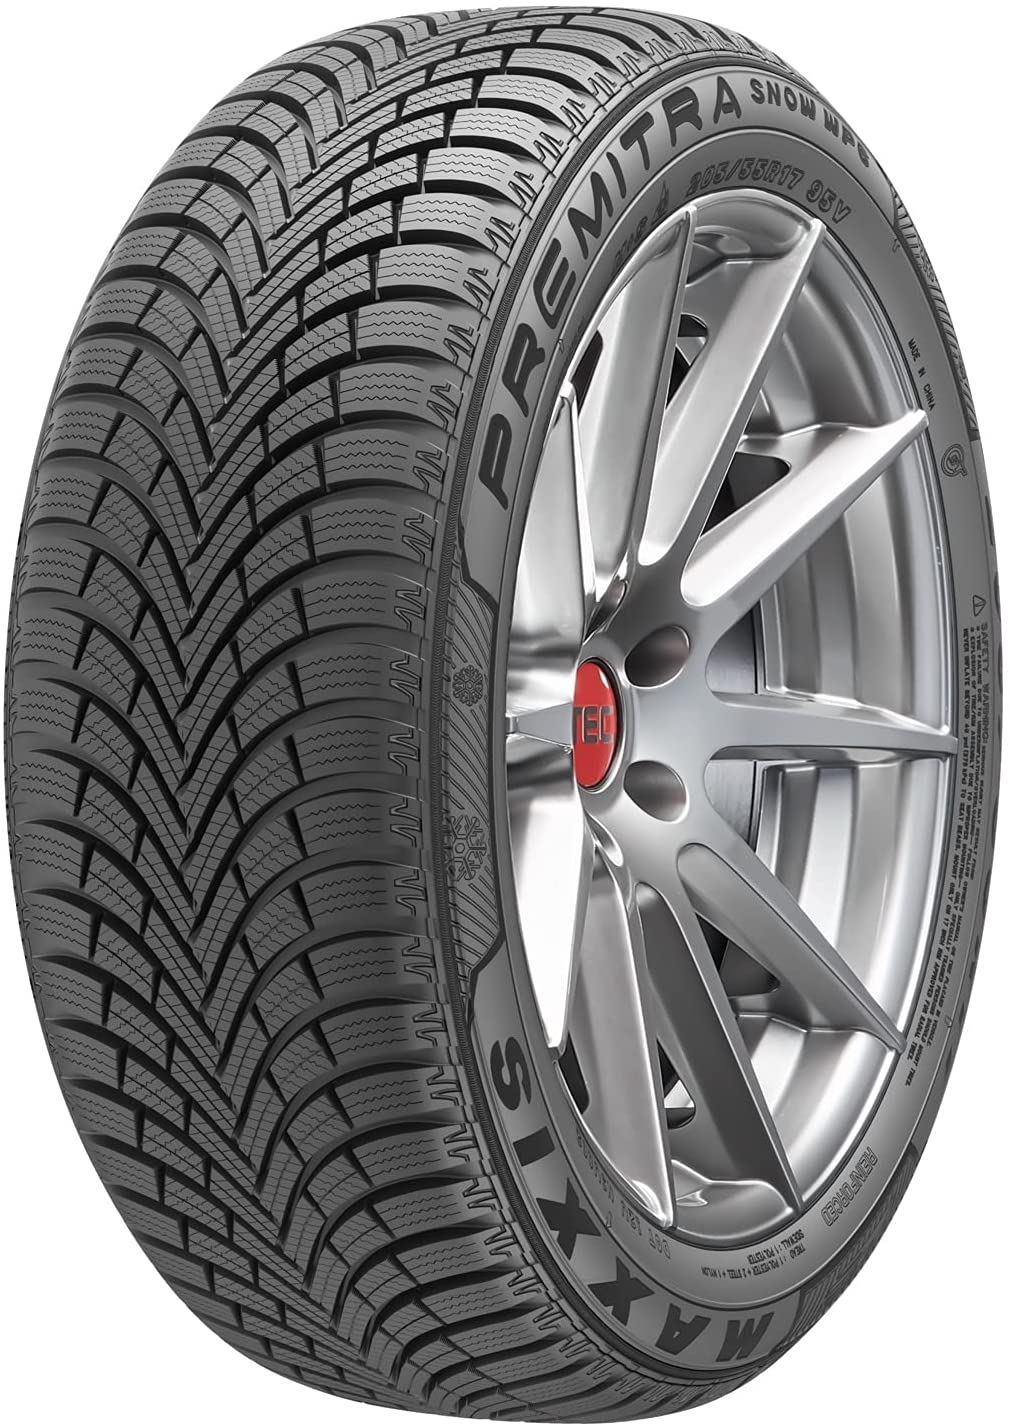 Gomme Nuove Maxxis 235/50 R18 101V PREMITRA SNOW WP-6 XL M+S pneumatici nuovi Invernale